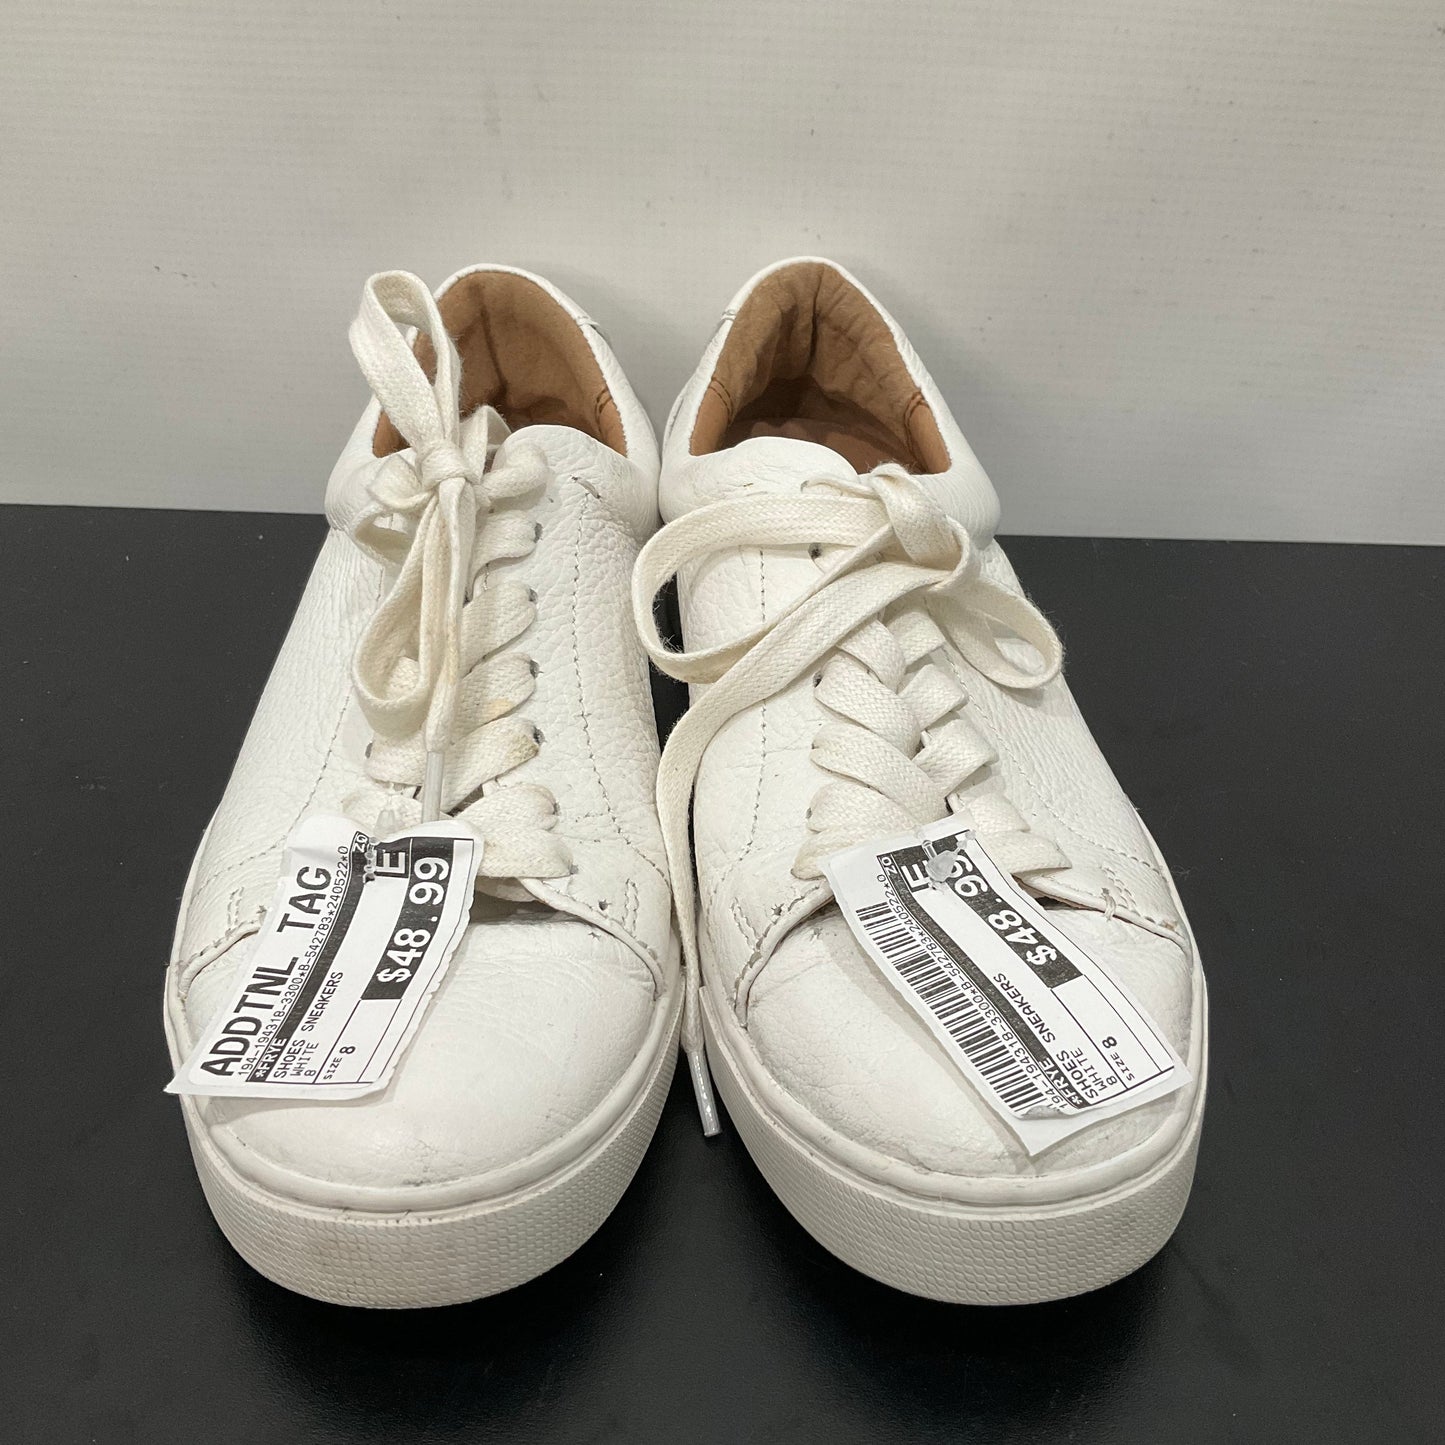 White Shoes Sneakers Frye, Size 8